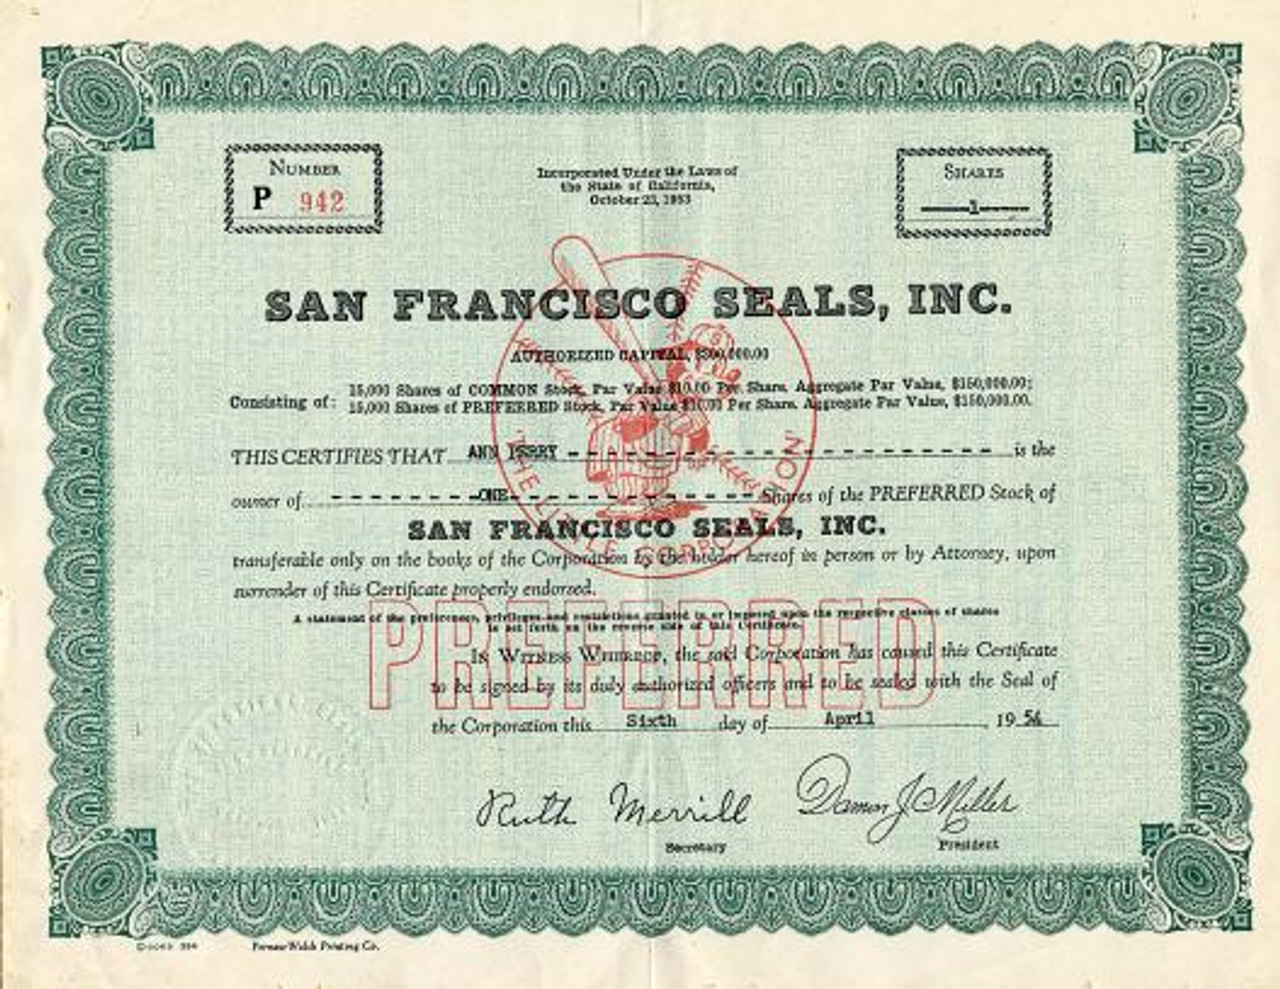 San Francisco Seals, Inc. Baseball Team (Pre S.F. Giants) - California 1954  - Scripophily.com, Collect Stocks and Bonds, Old Stock Certificates for  Sale, Old Stock Research, RM Smythe